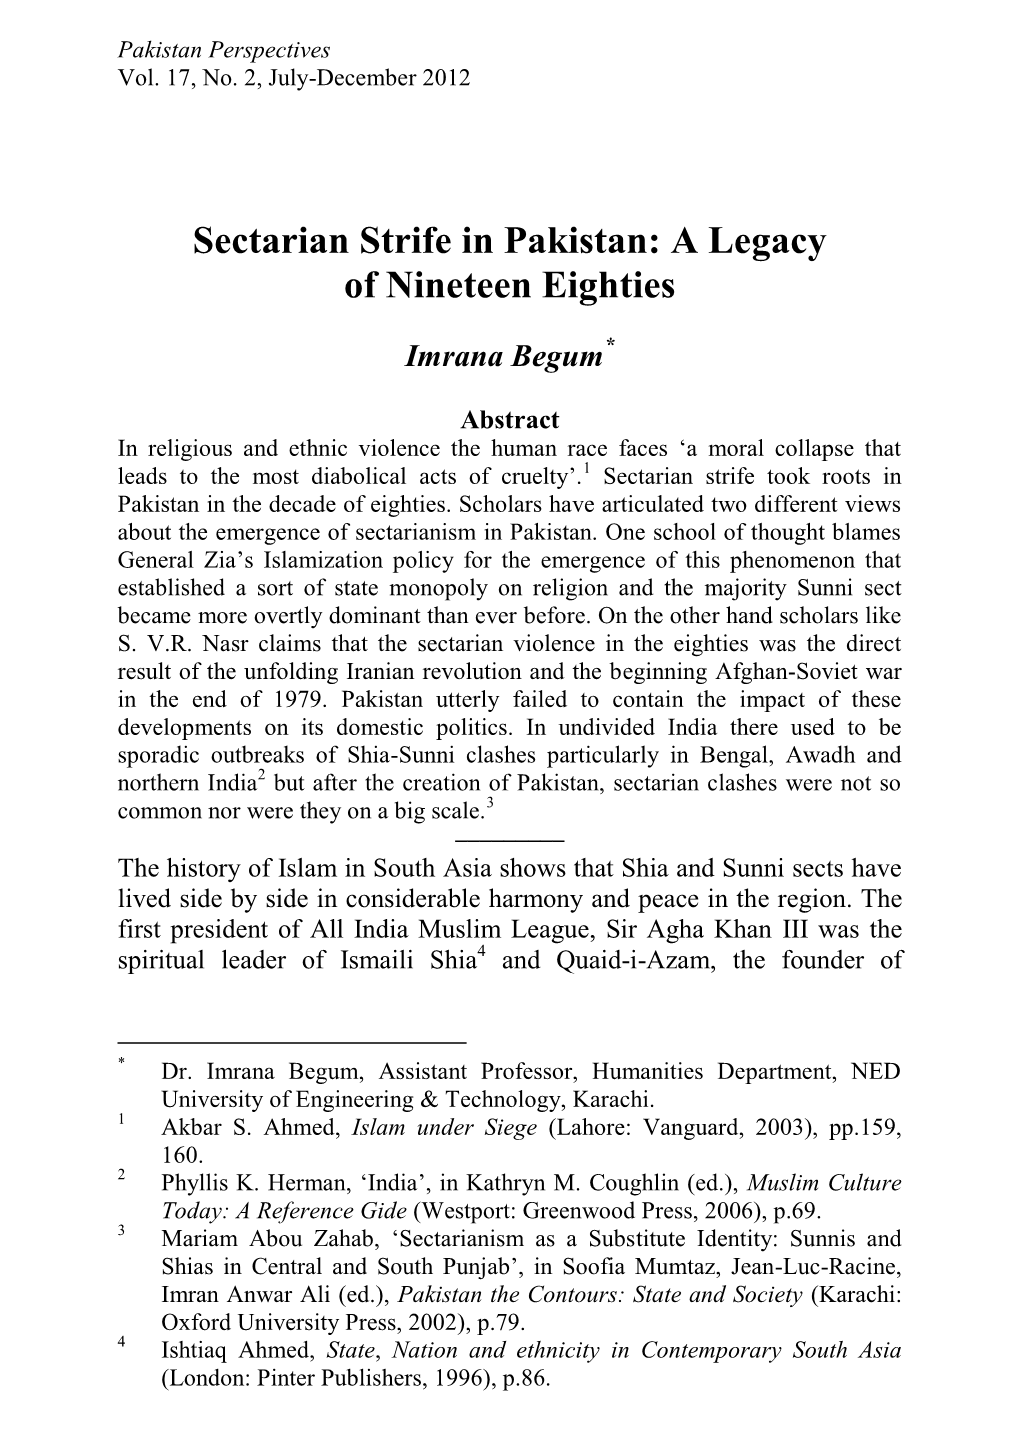 Sectarian Strife in Pakistan: a Legacy of Nineteen Eighties